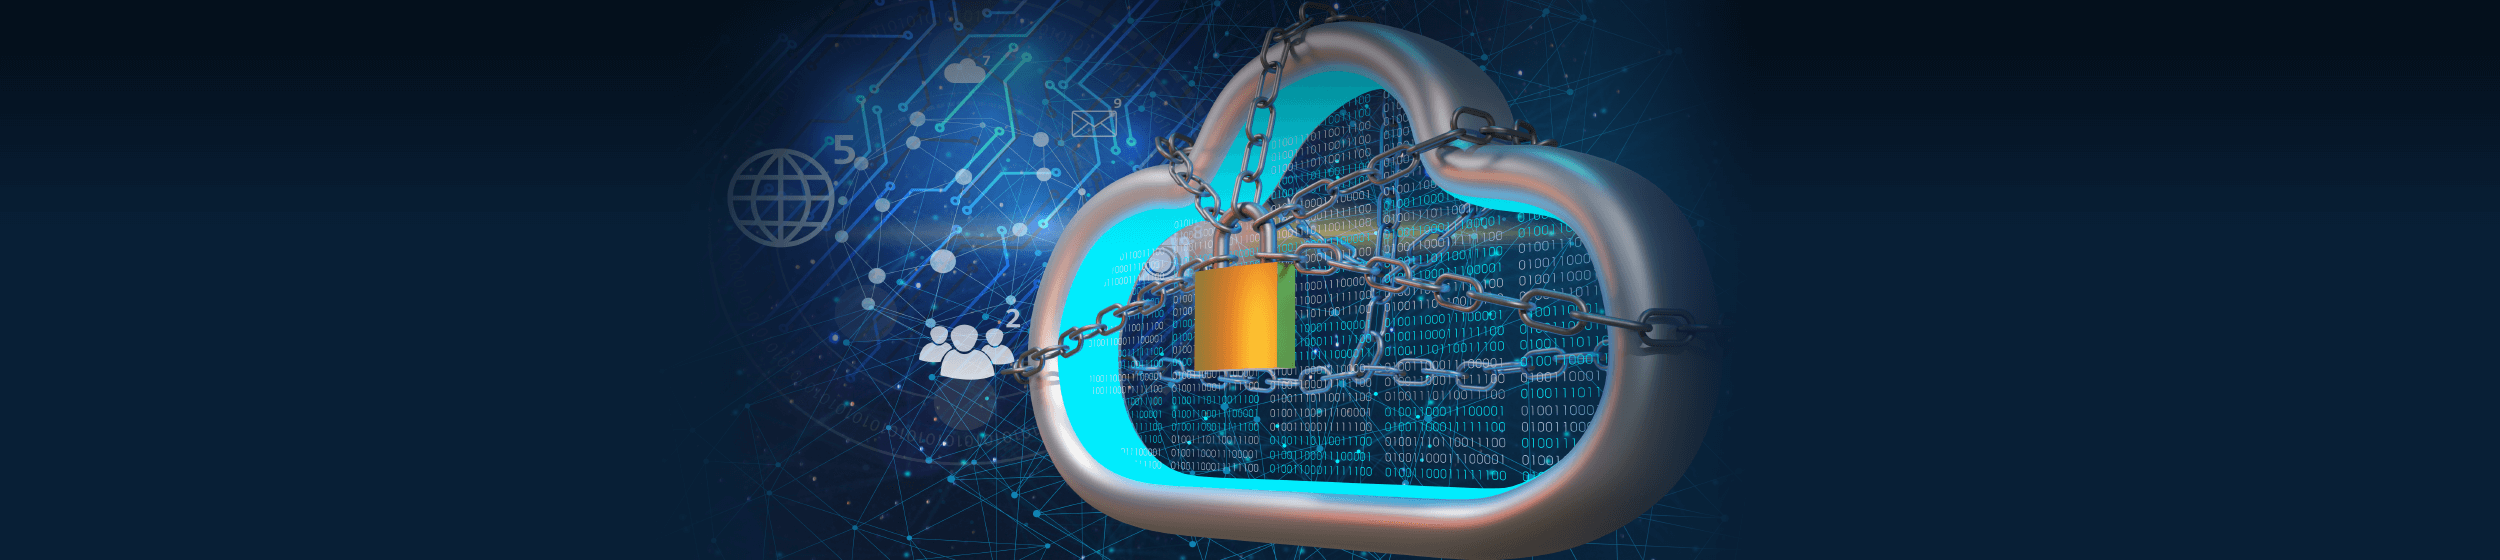 Banner-Enhanced Enterprise Network Security of Cloud Connected Devices for Leading US-Based Manufacturer